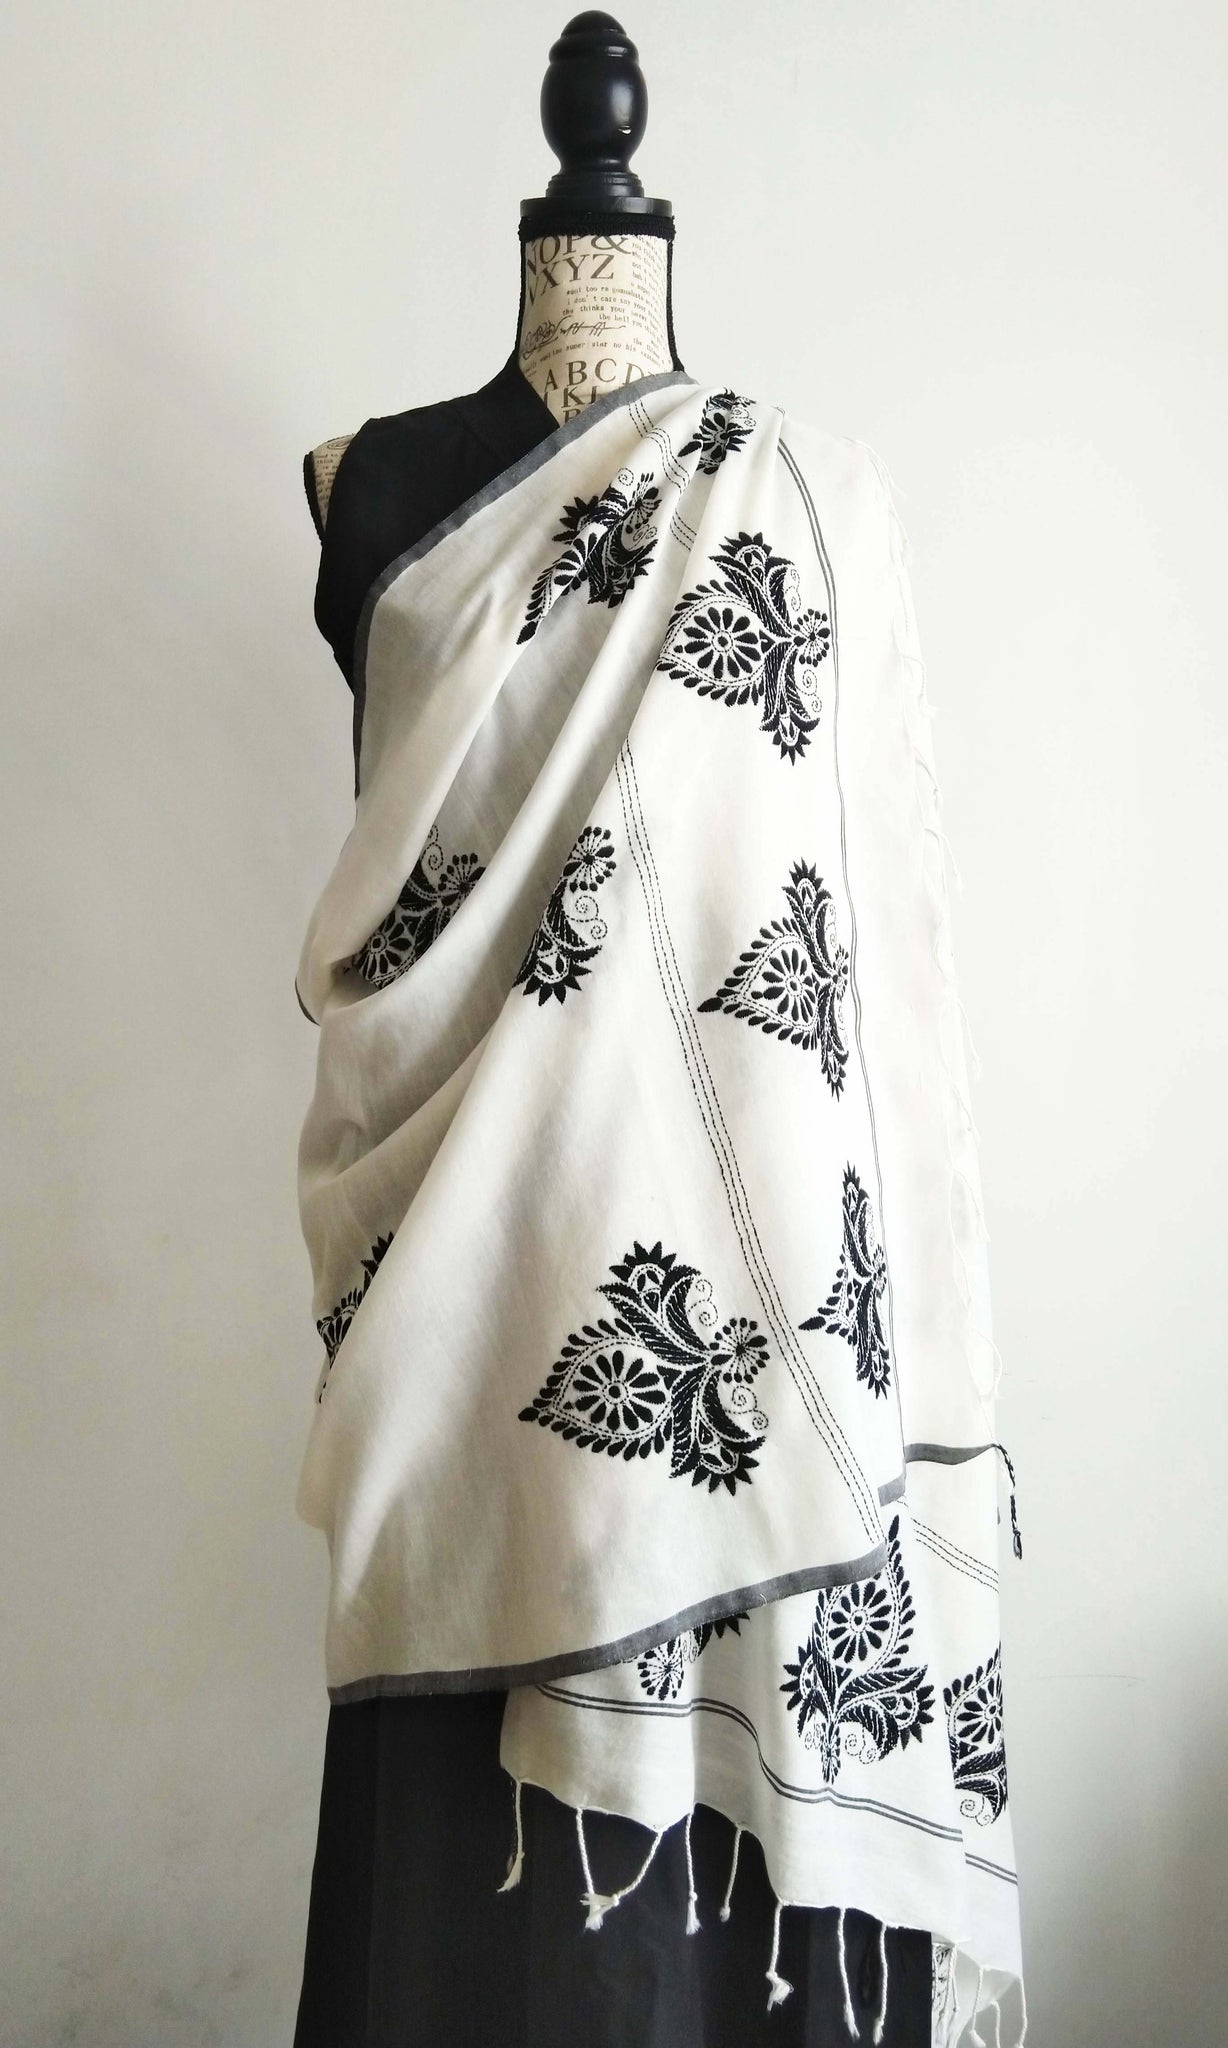 w94 Stole I Fine Kantha Hand Embroidery On Hand Woven Soft Cotton | Made To Order In 15 - 20 Working Days